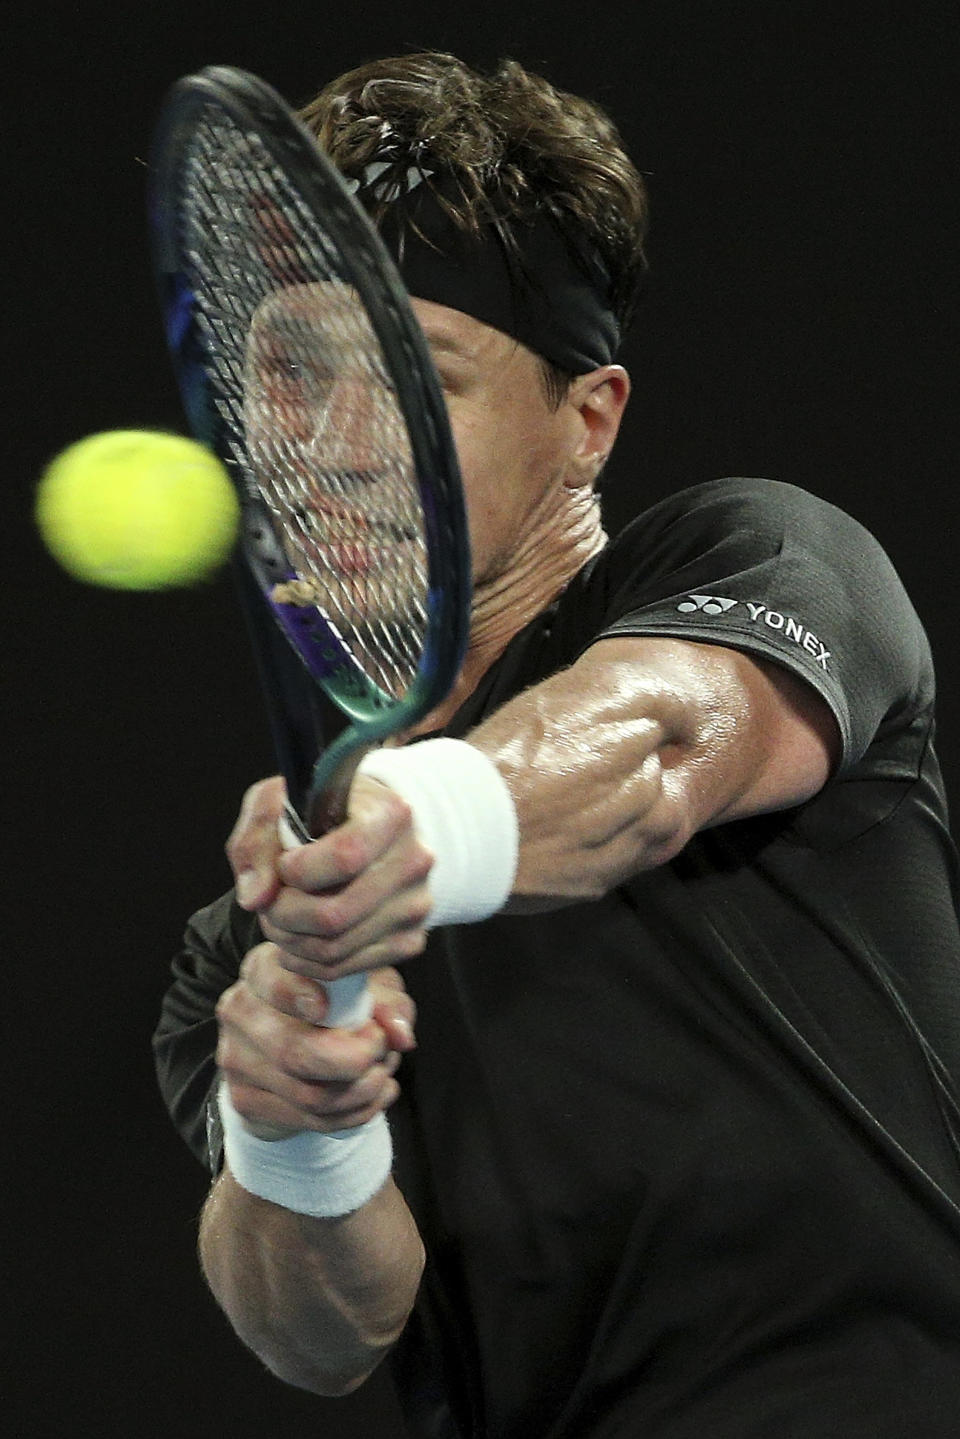 Ricardas Berankis of Lithuania plays a backhand during his singles match against Rafael Nadal of Spain at Summer Set tennis tournament ahead of the Australian Open in Melbourne, Australia, Thursday, Jan. 6, 2022. (AP Photo/Hamish Blair)